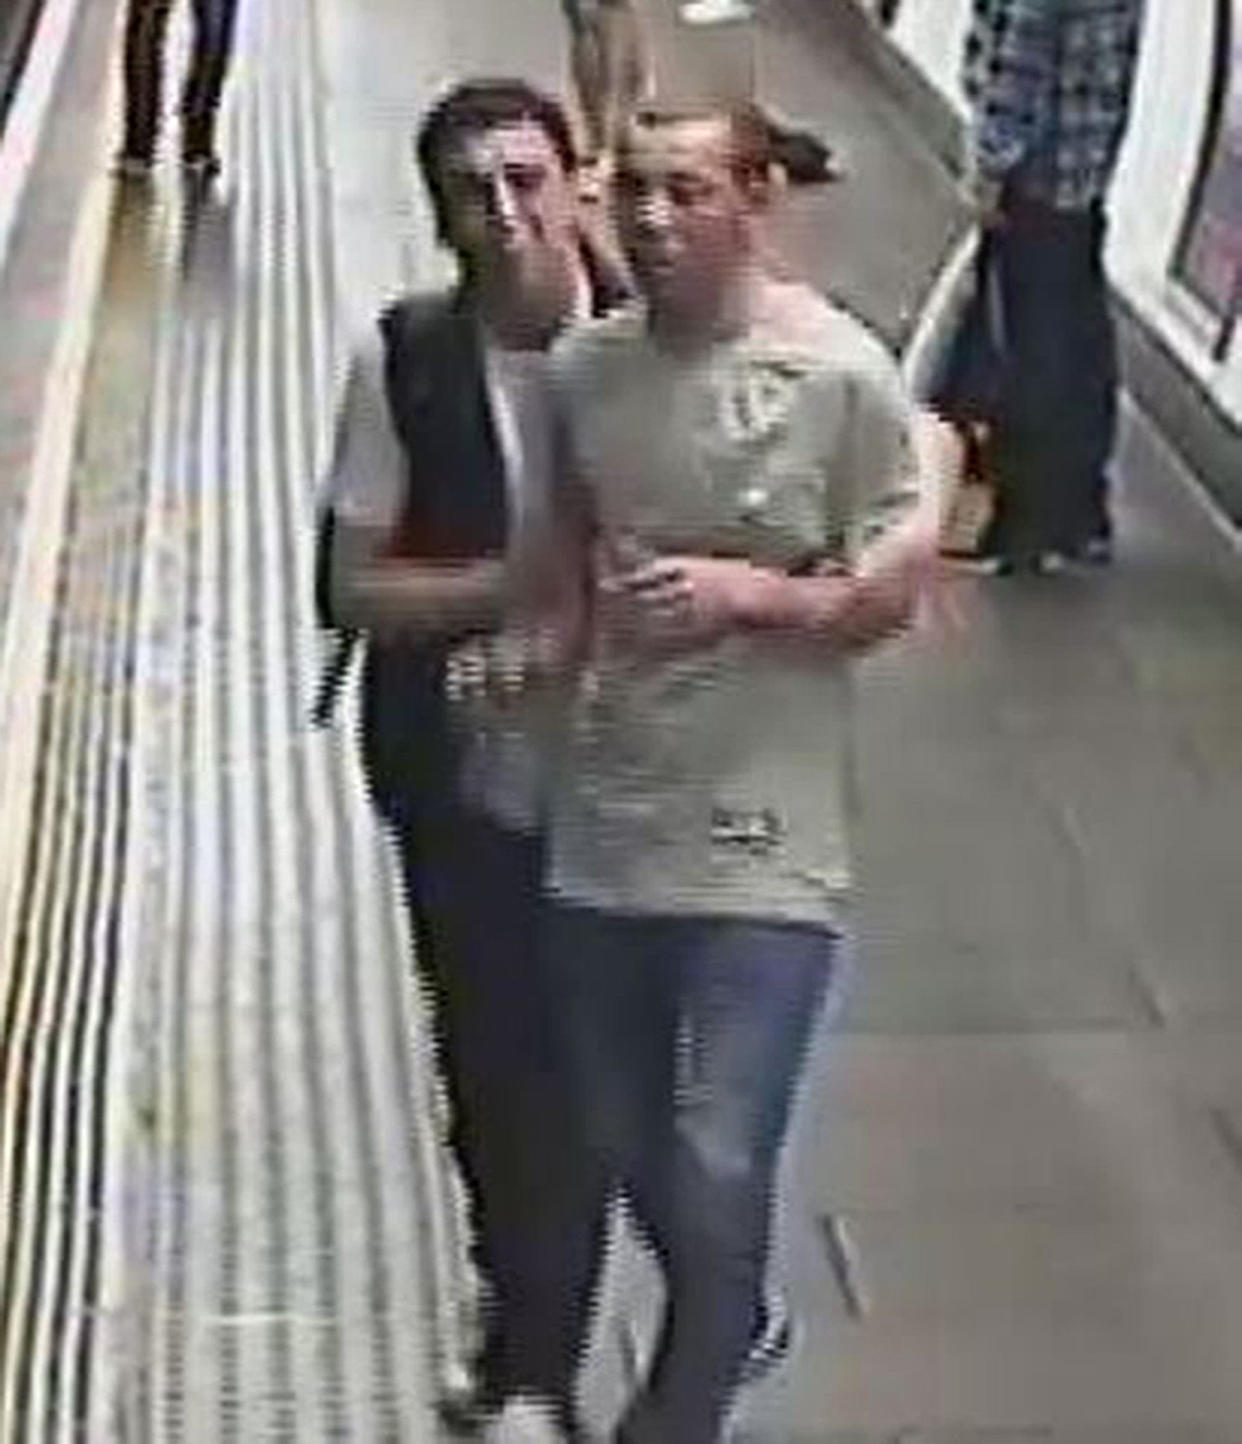 British Transport Police handout CCTV image of two men they will like to speak to following an incident where gas was released on board a train carriage at Oxford Circus station in London